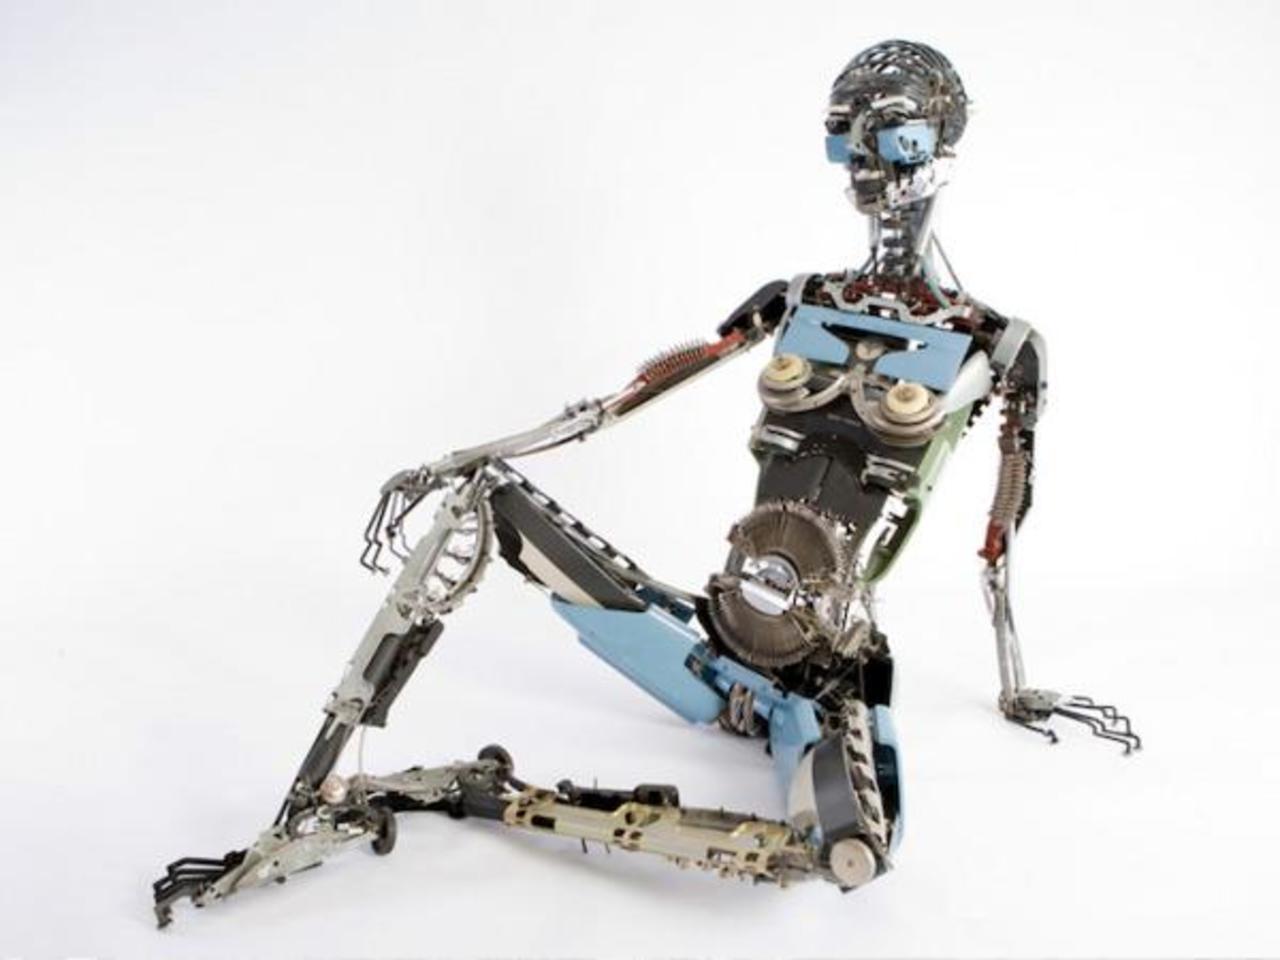 Incredibly Lifelike Sculptures Built With Old Typewriter Parts : http://bit.ly/14JjzgK - #Art #Sculpture http://t.co/s4y1OTNUIp